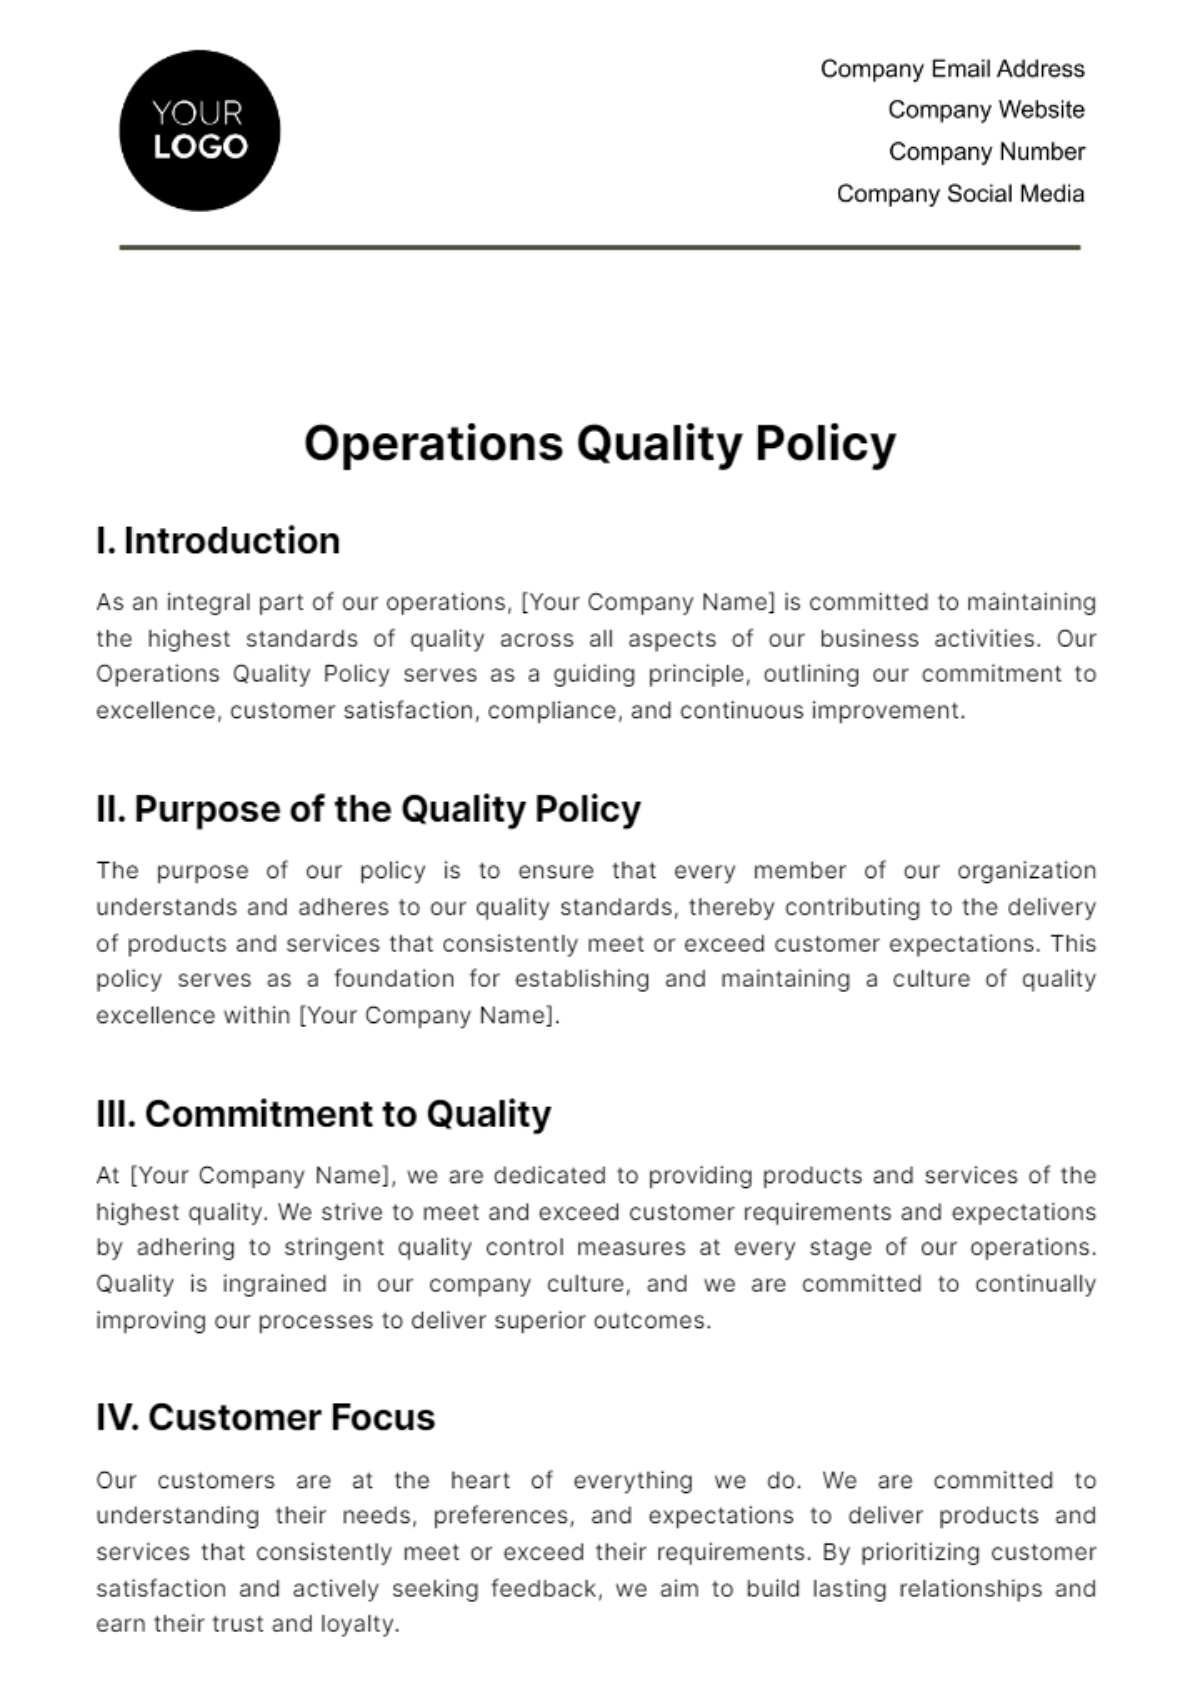 Free Operations Quality Policy Template